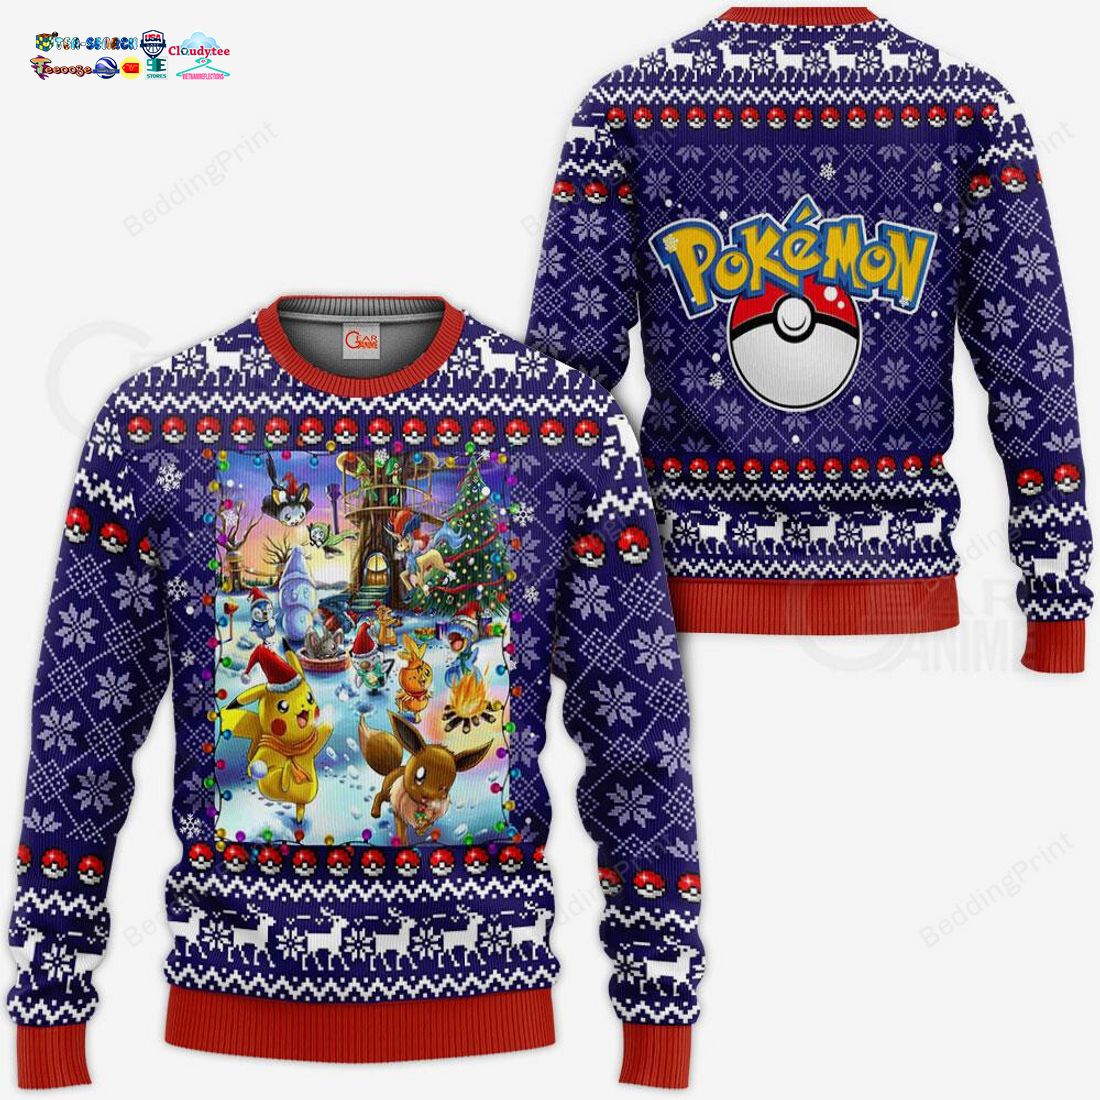 Pokemon Anime Ugly Christmas Sweater - Eye soothing picture dear